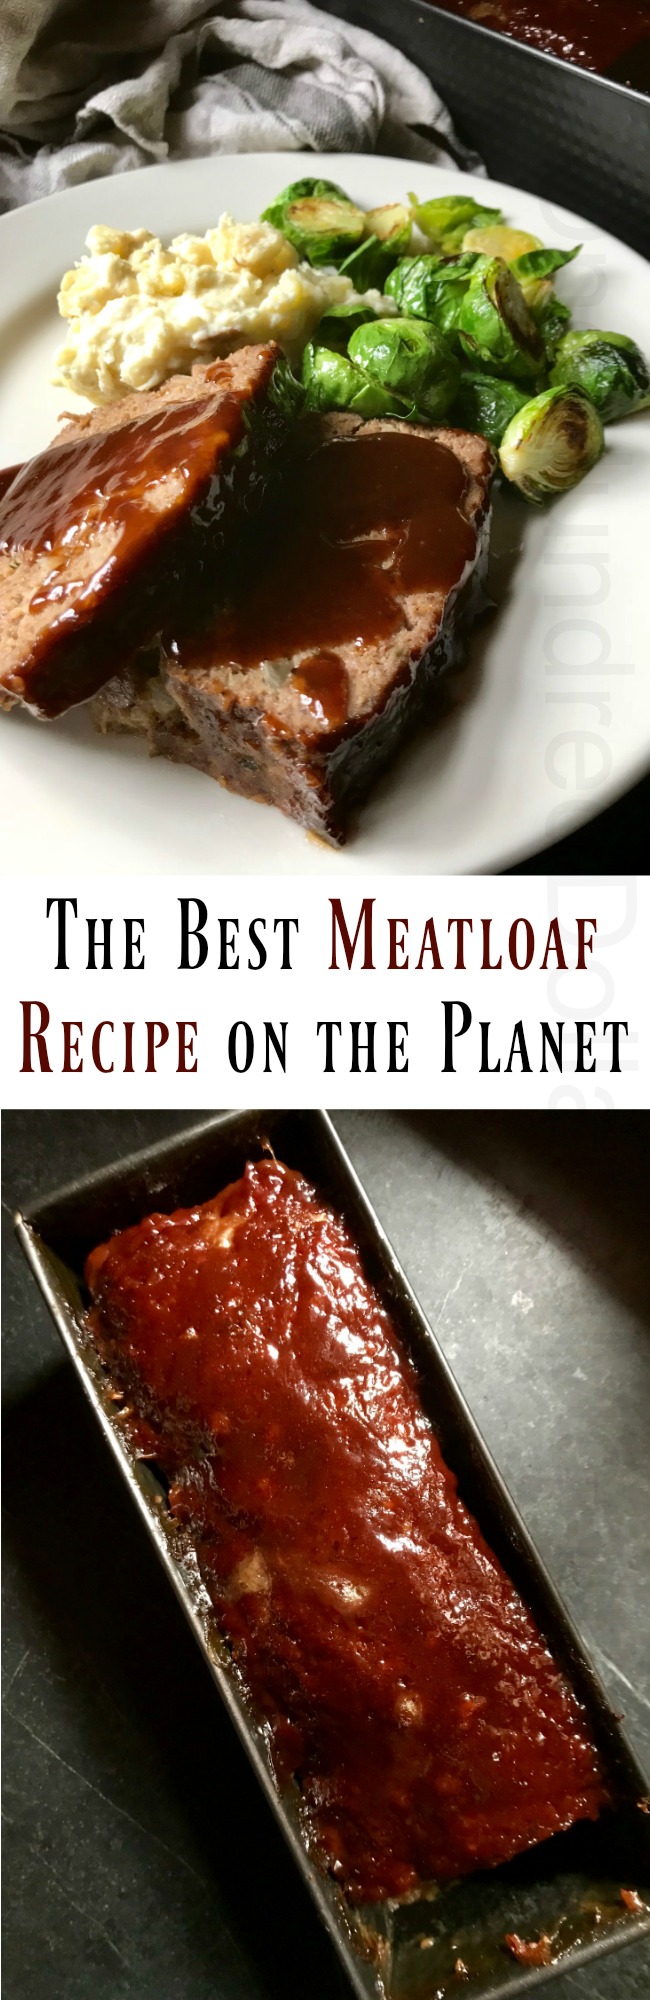 The Best Meatloaf Recipe on the Planet – Even Ralphie Would Love It!